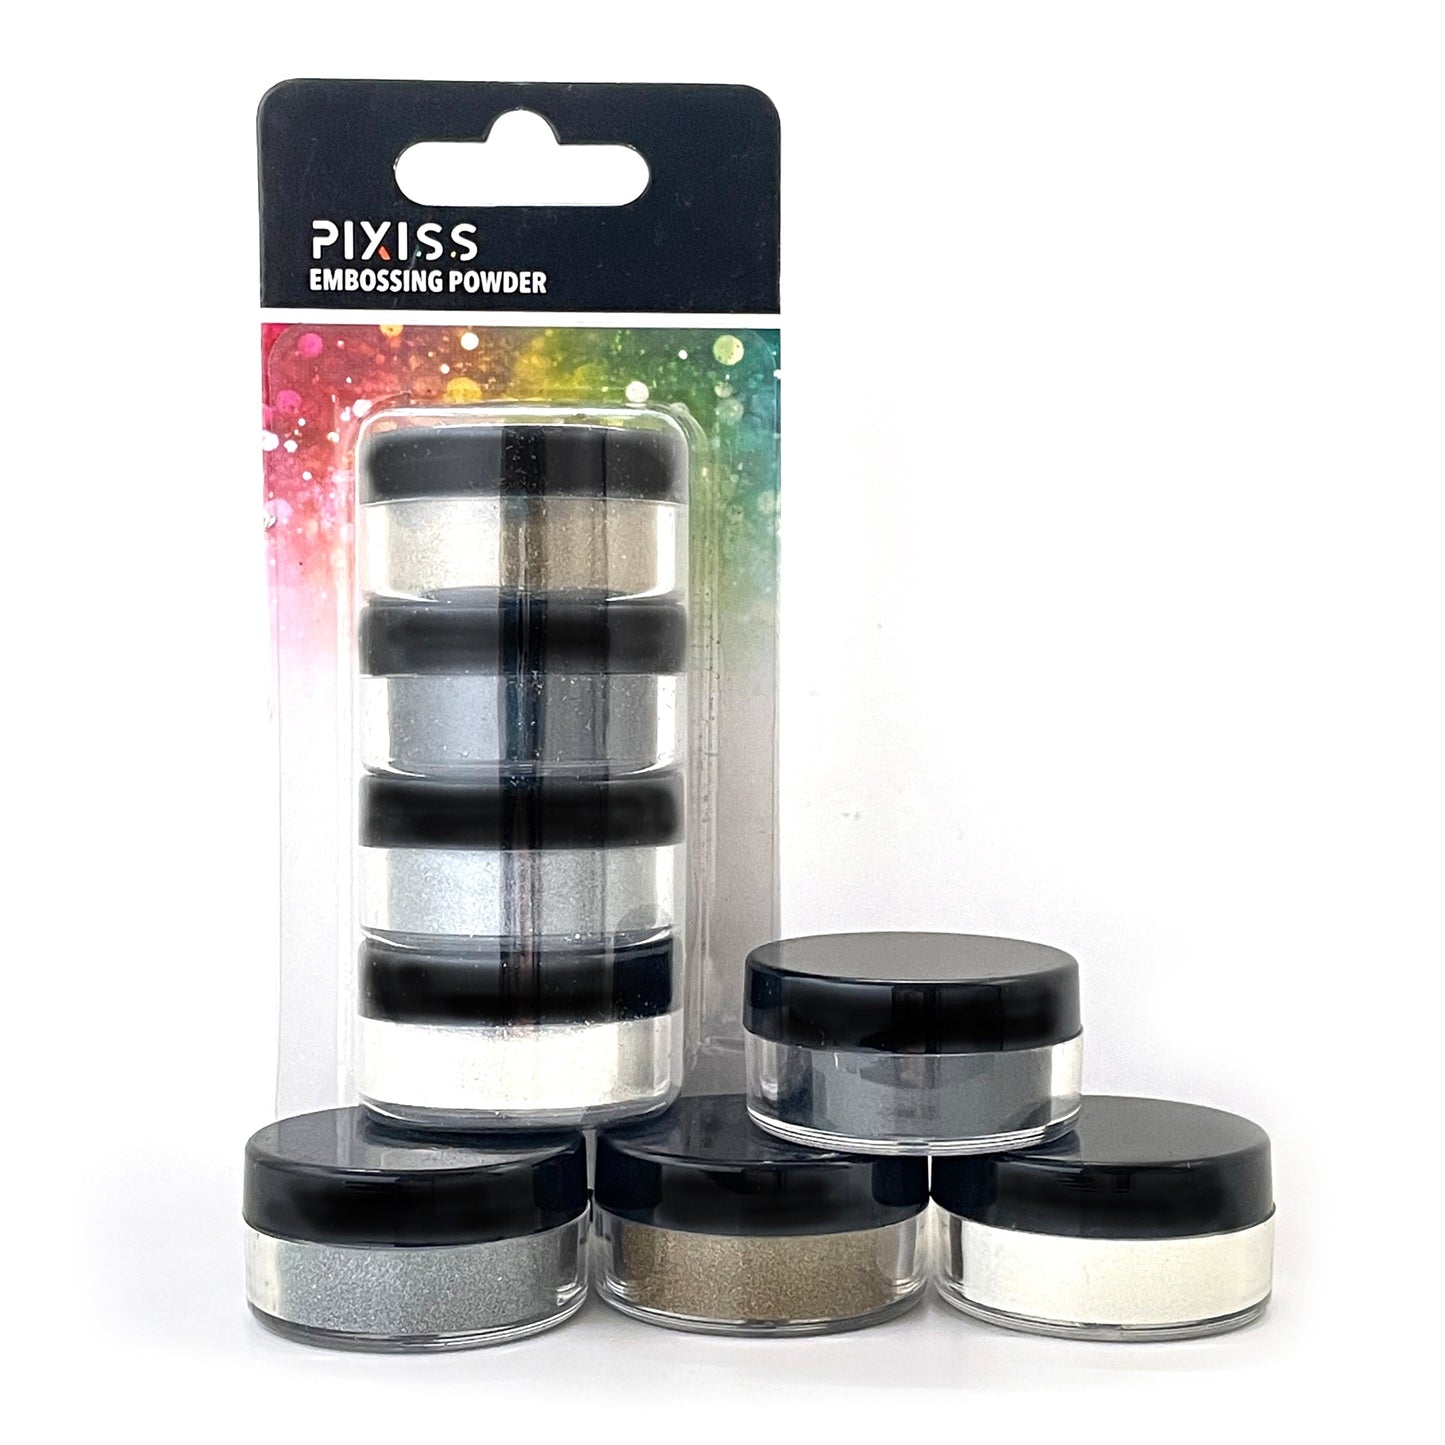 PIXISS Embossing Powders Set of 4 Colors by Pixiss